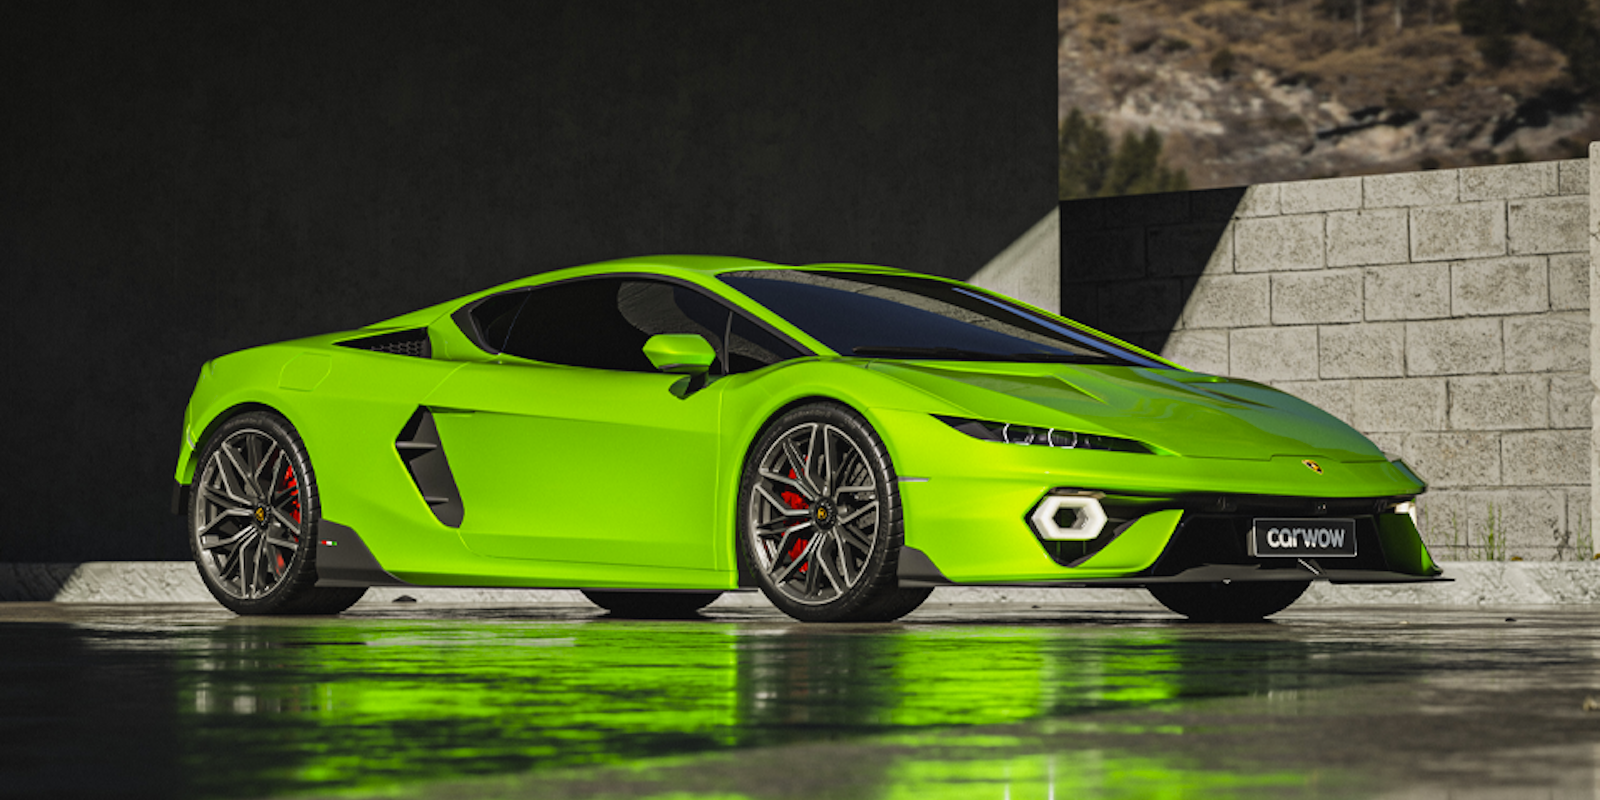 New Lamborghini Huracan replacement: design rendered by carwow